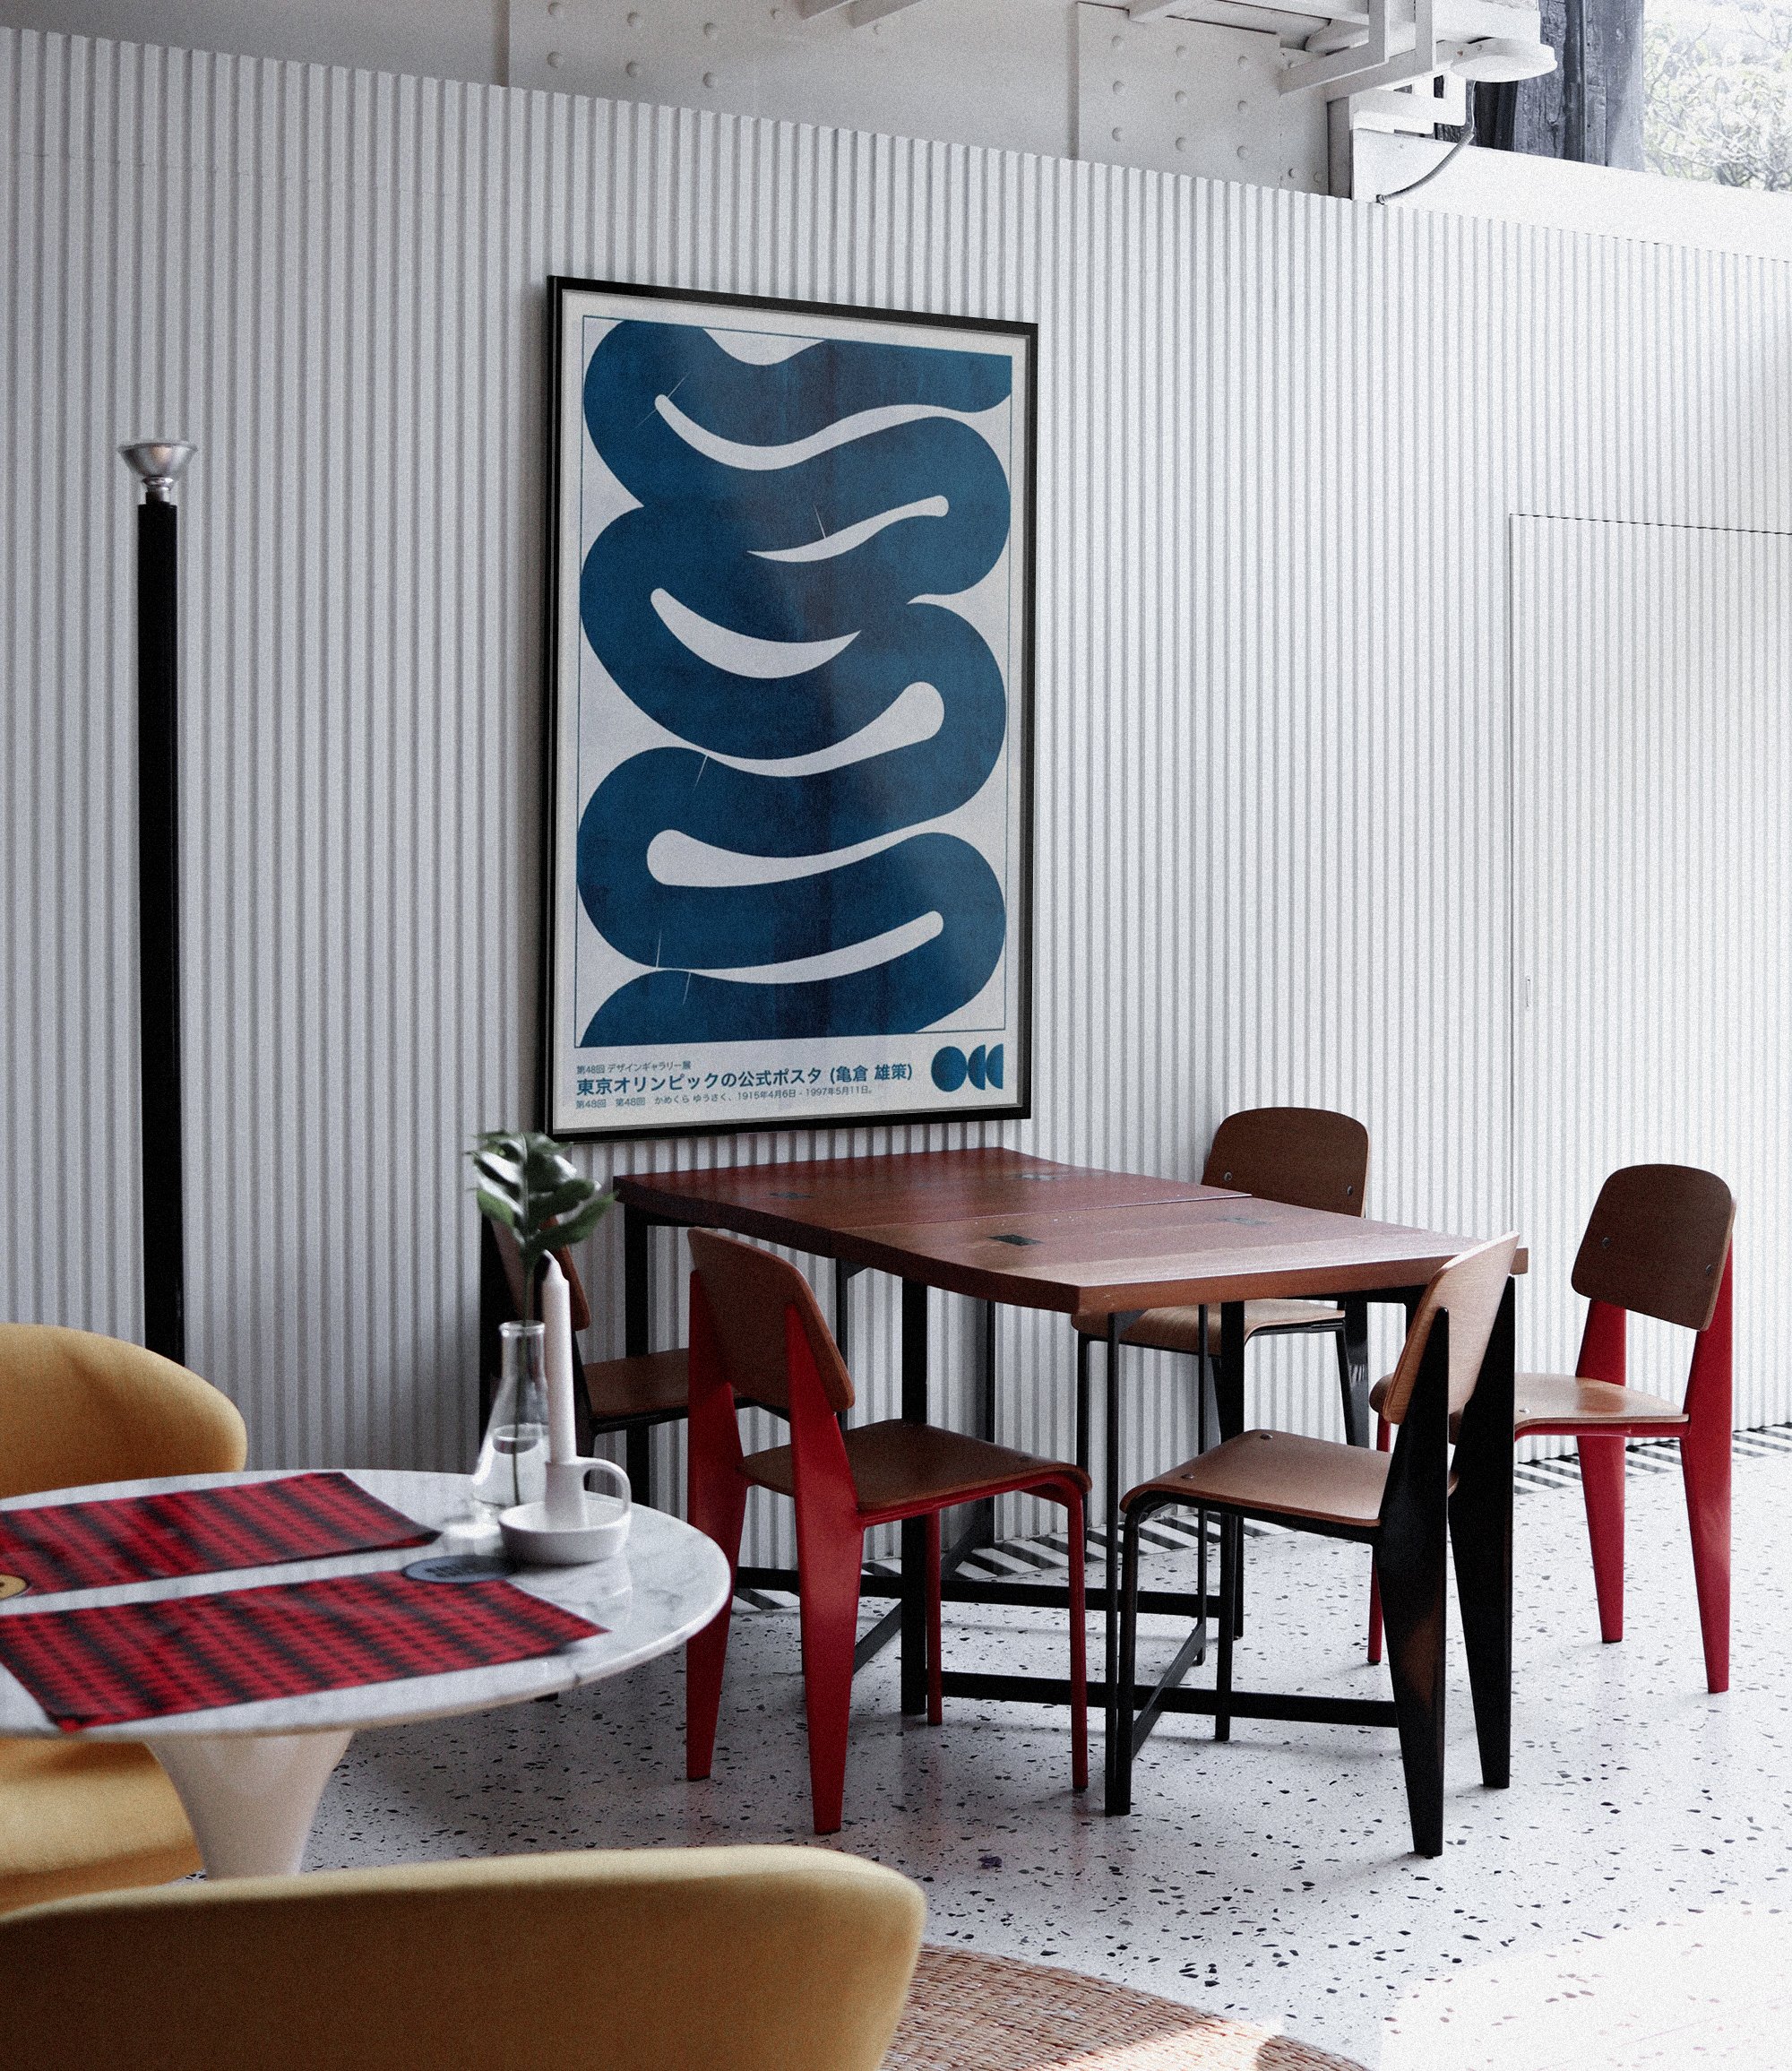 Dining area with large artwork on the wall